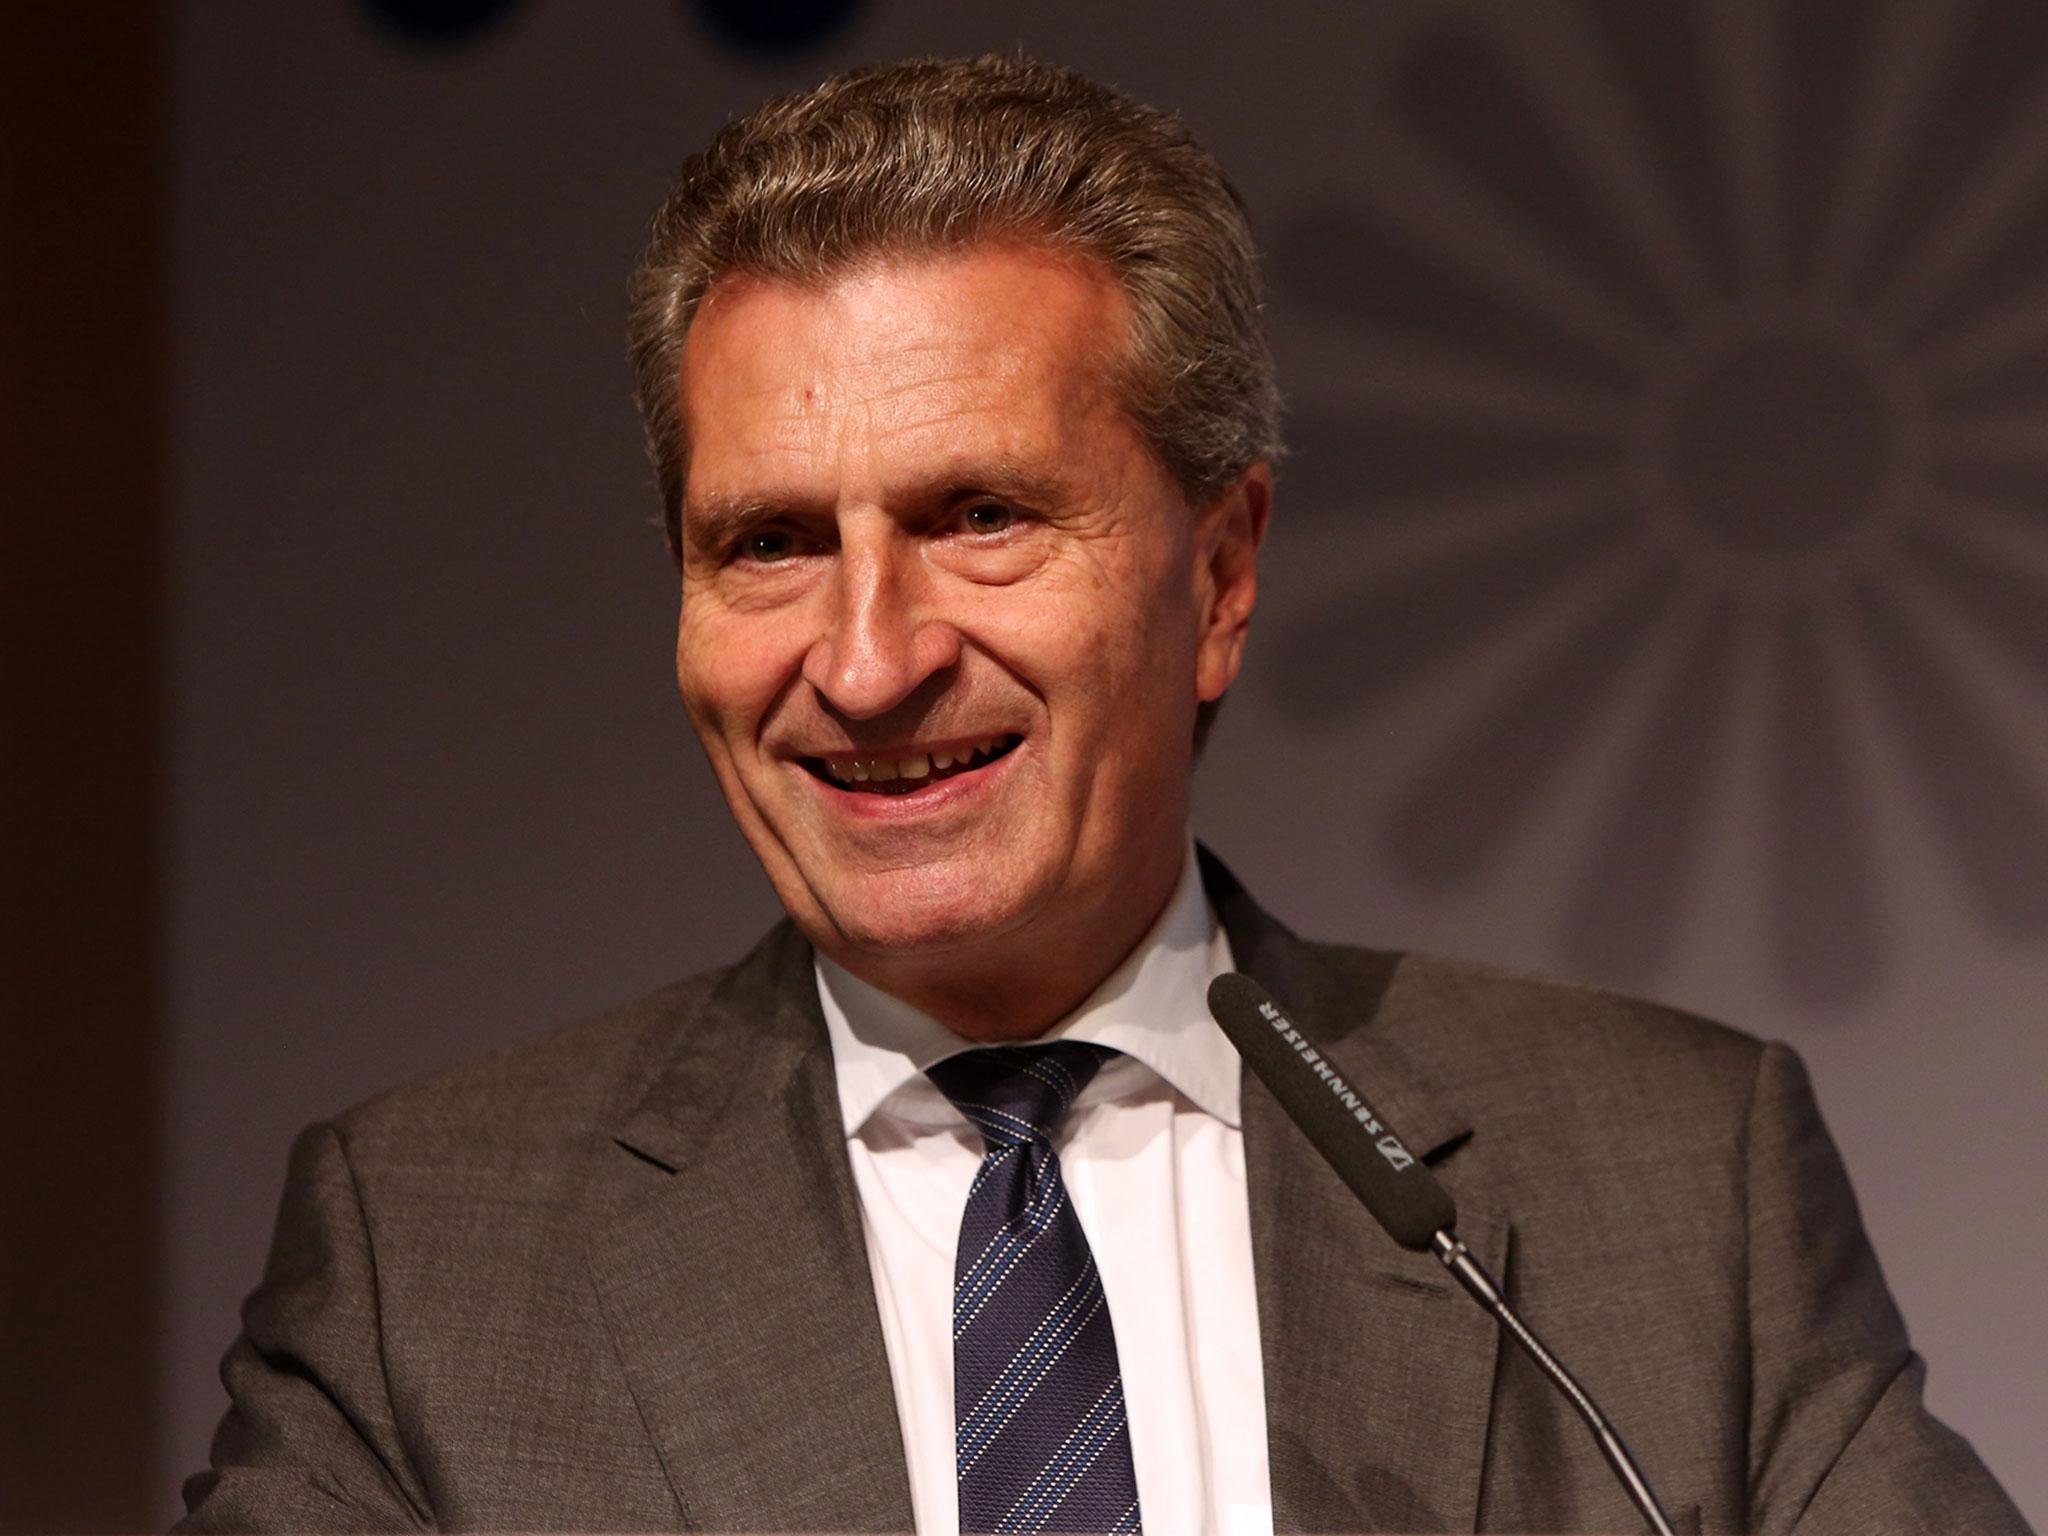 Guenther Oettinger, European Commissioner for Digital Economy and Society, also joked about 'compulsory gay marriage'